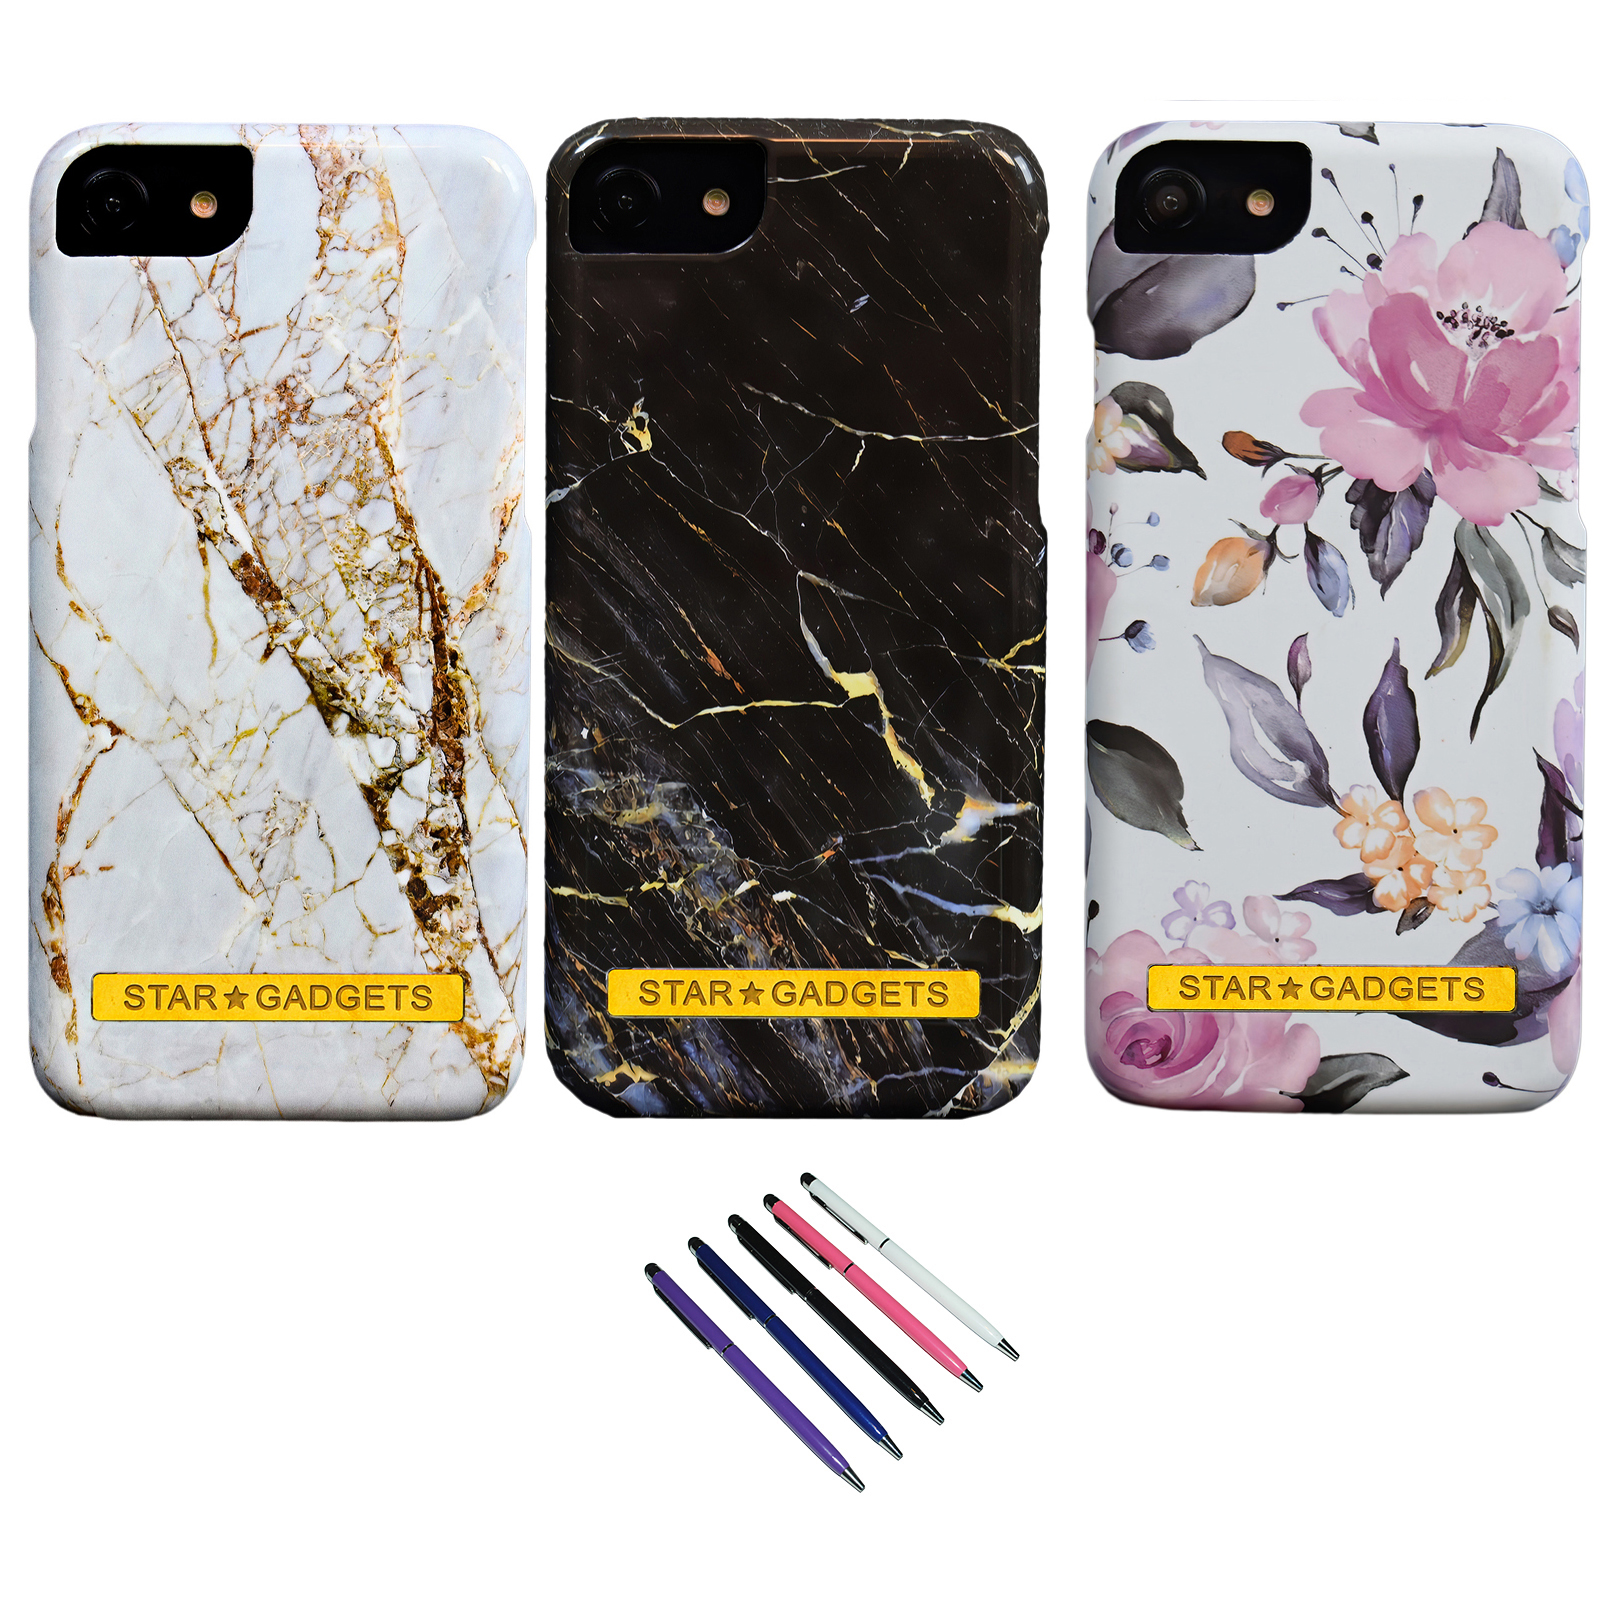 iPhone 7 / 8 - Case Protection Flowers / Marble